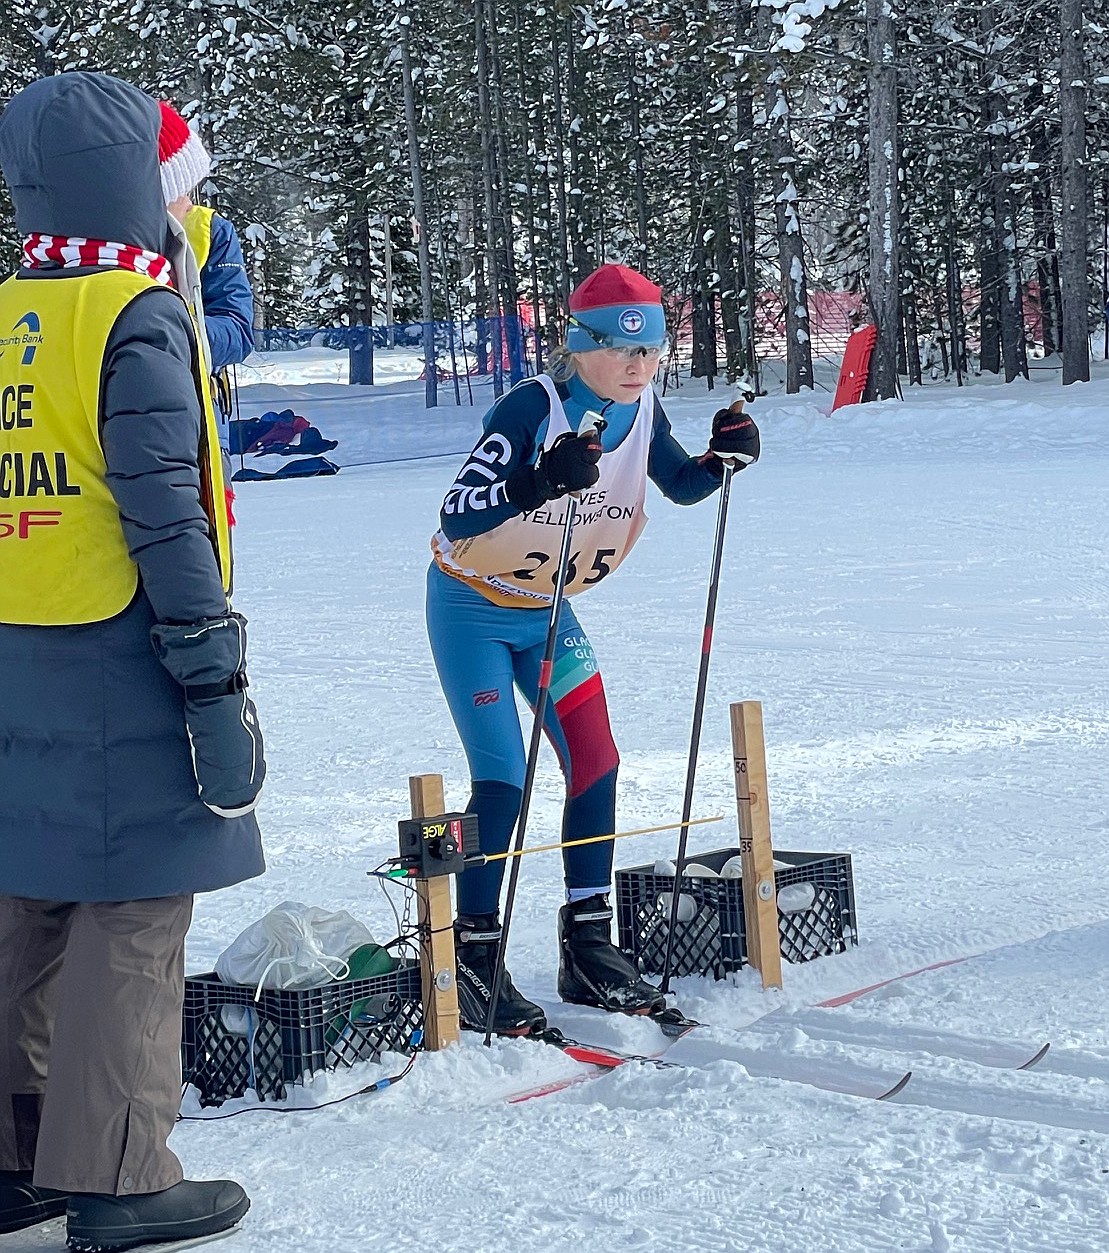 Skier Hudson Longenecker prepares to take off from the start at West Yellowstone. (Courtesy photo)